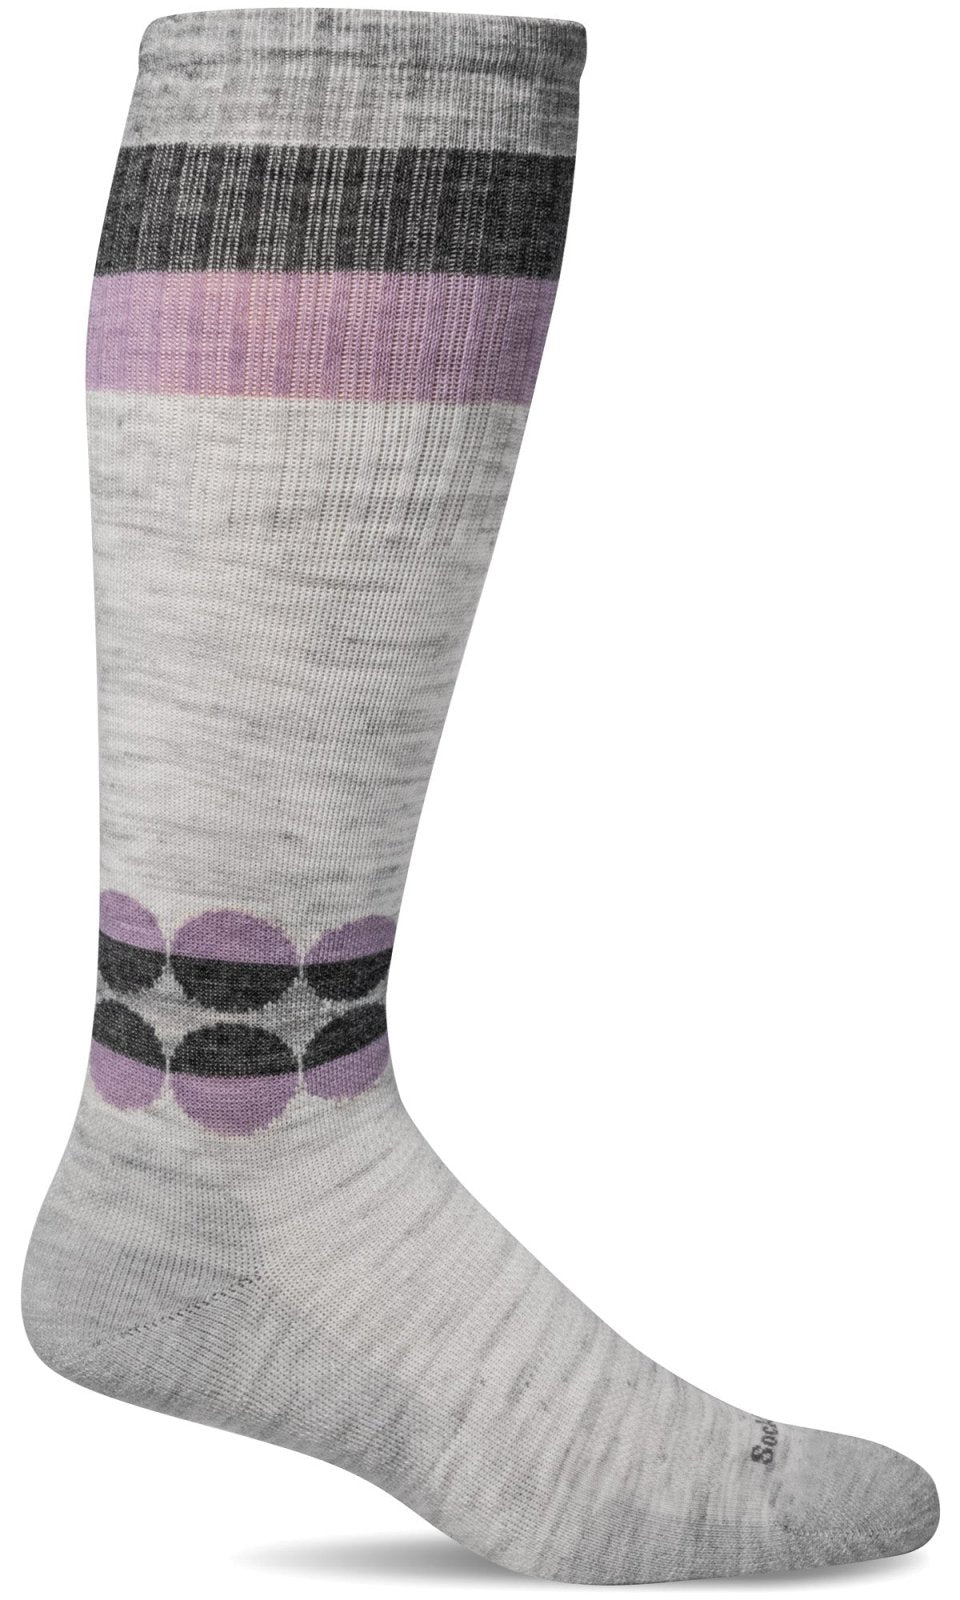 Women's Spin Knee High | Moderate Graduated Compression Socks - Merino Wool Sport Compression - Sockwell